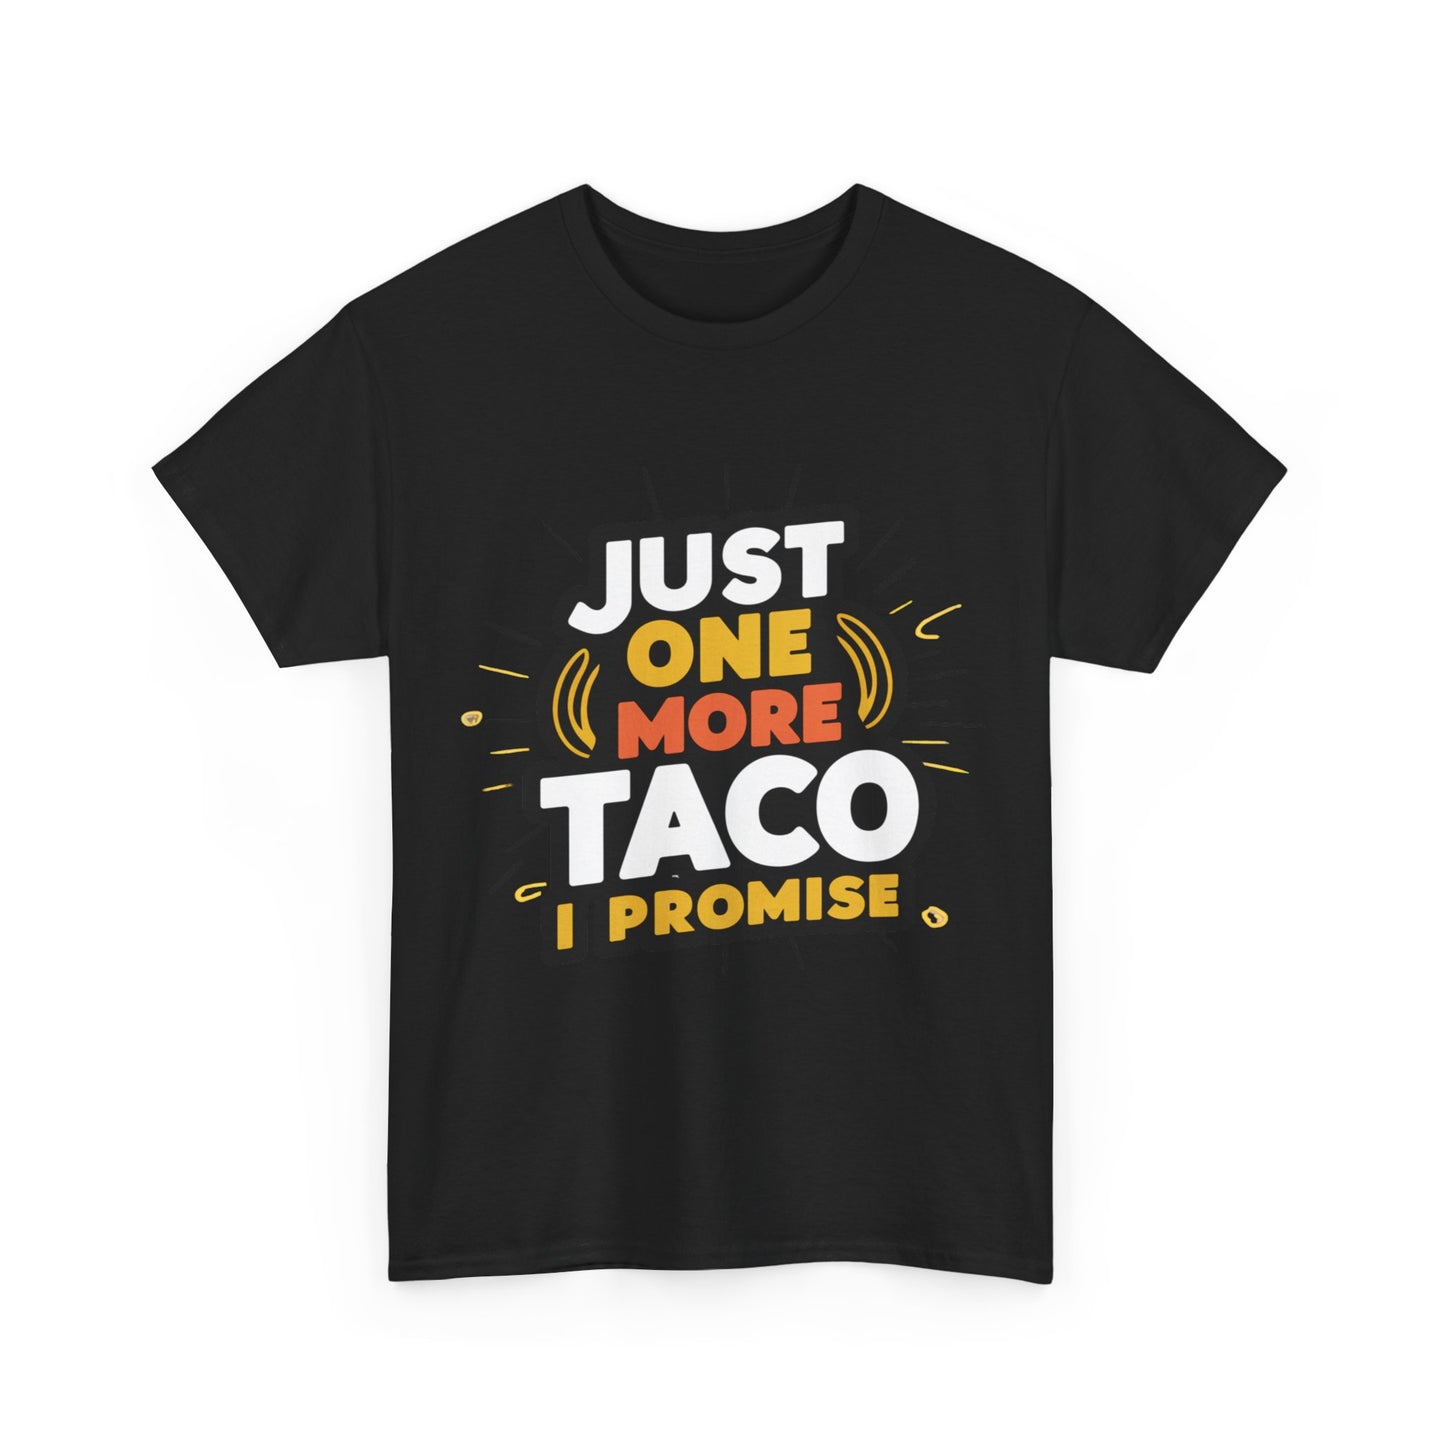 Just One More Taco I Promise Mexican Food Graphic Unisex Heavy Cotton Tee Cotton Funny Humorous Graphic Soft Premium Unisex Men Women Black T-shirt Birthday Gift-15